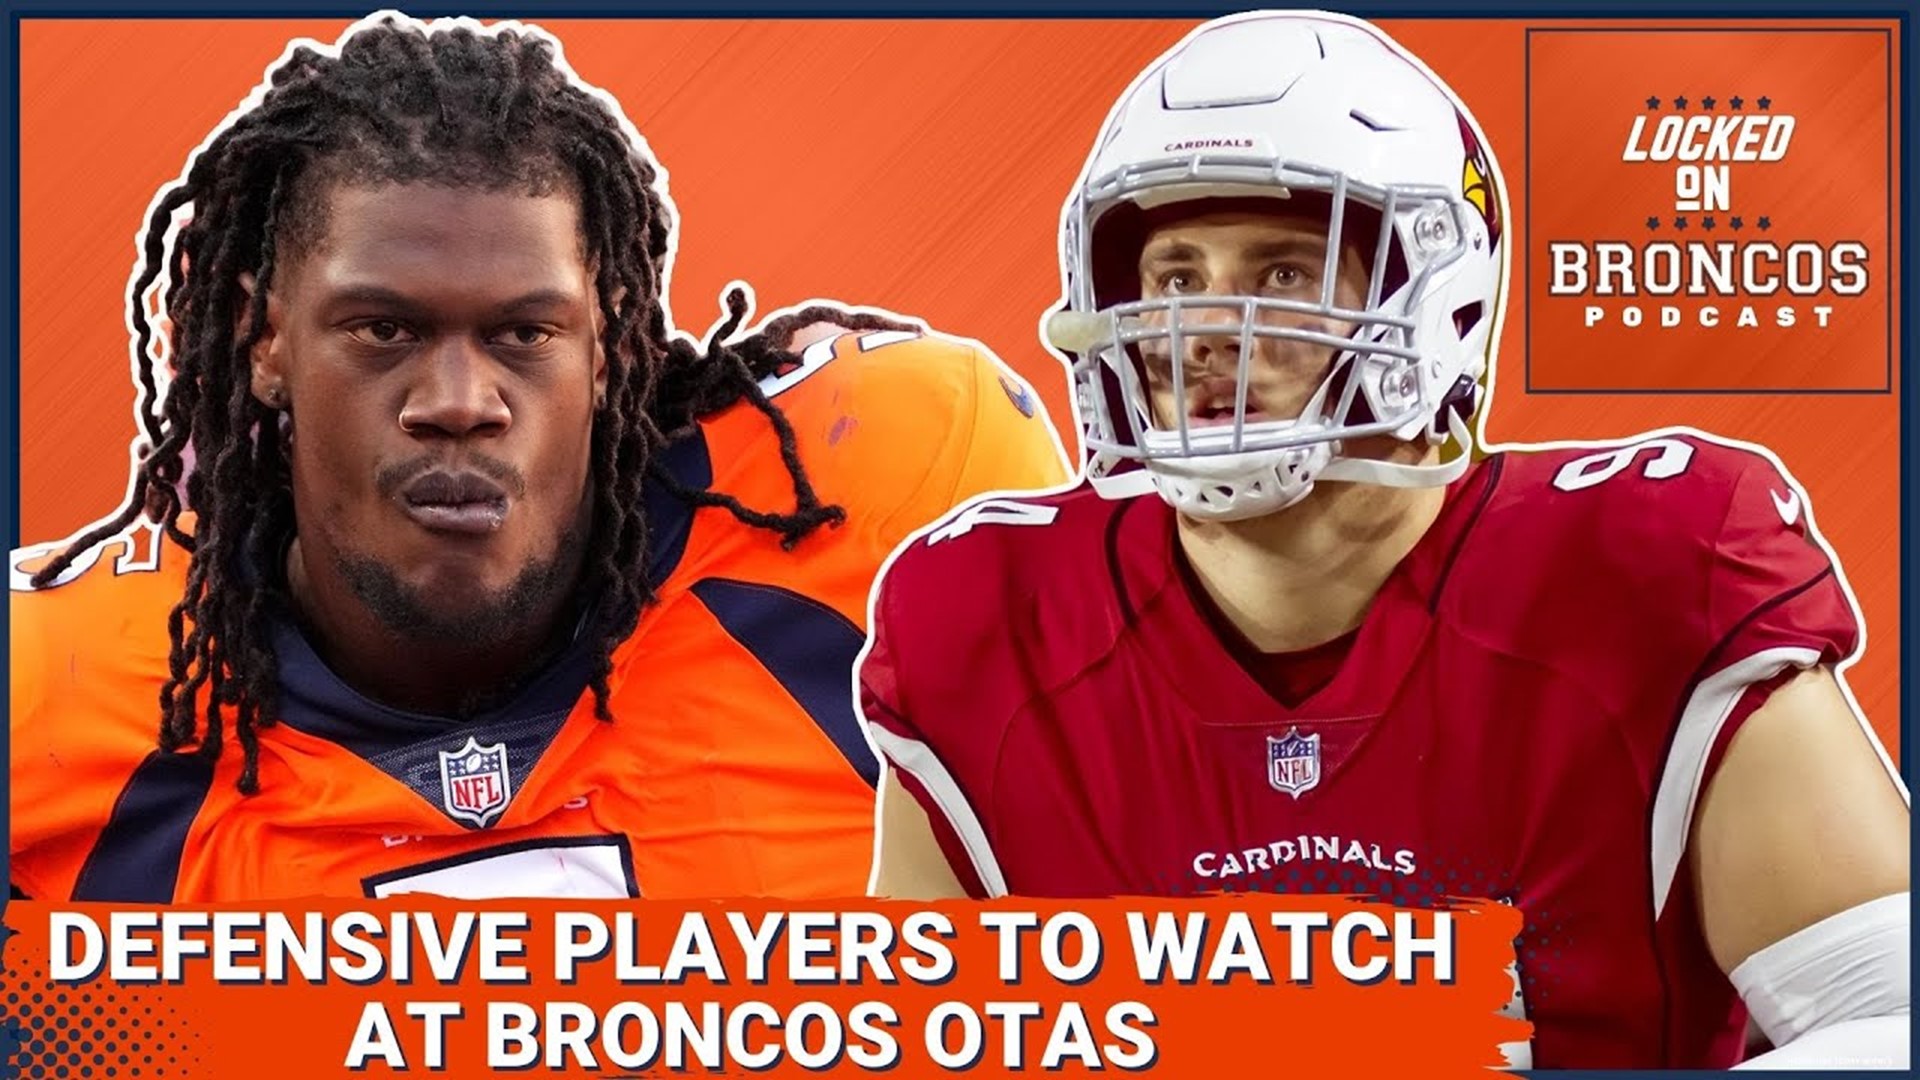 Denver Broncos defensive end Zach Allen is one of five defensive players to watch at Broncos OTAs. How has the new defensive end made the Broncos defense look?